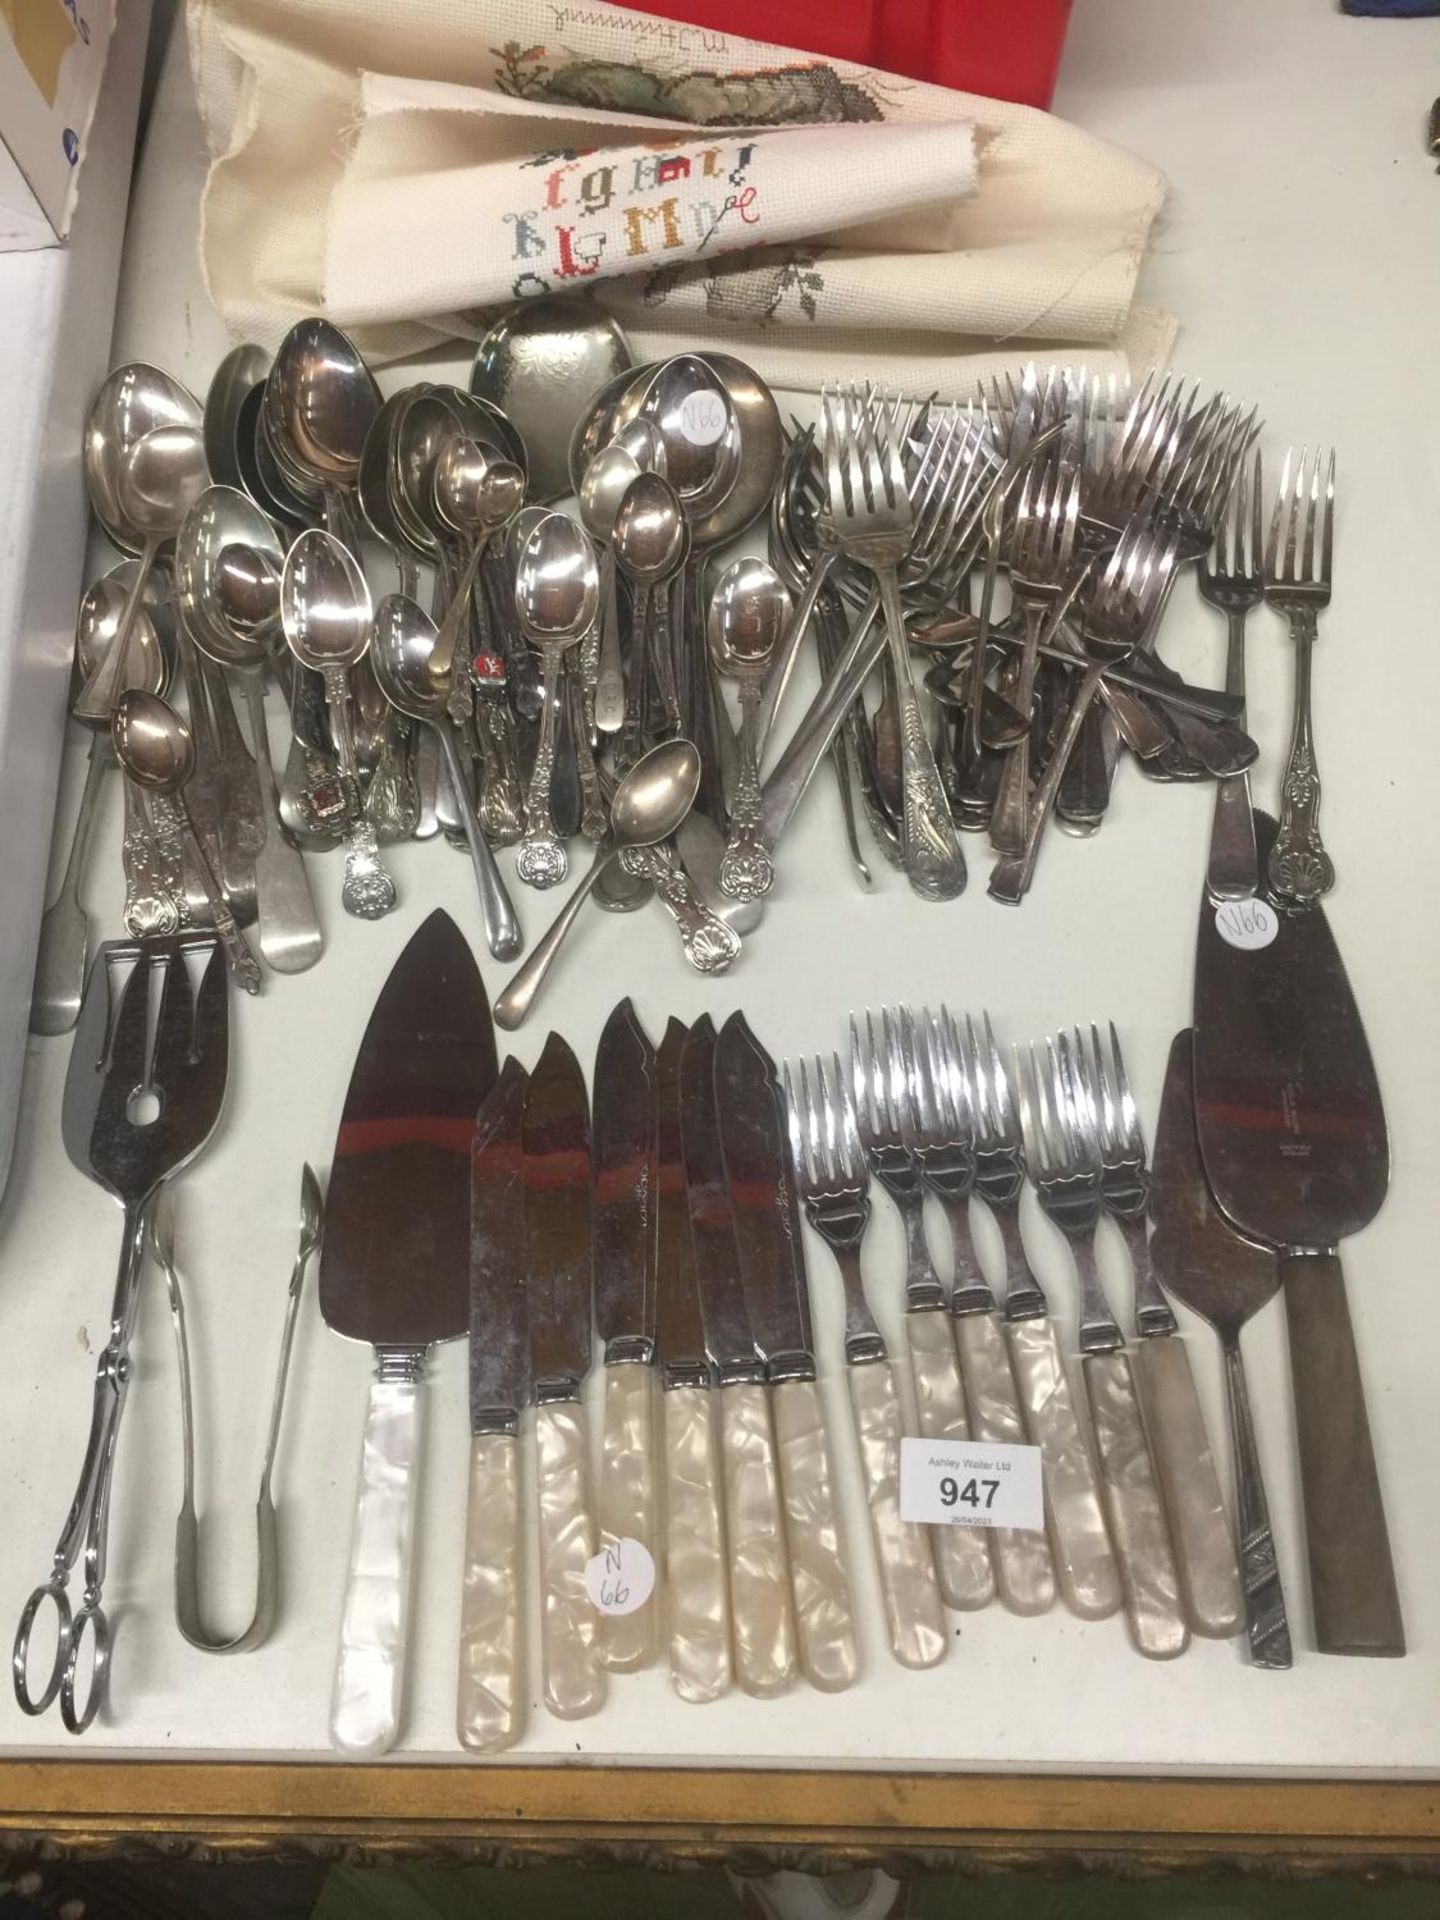 A LARGE AMOUNT OF FLATWARE TO INCLUDE KNIVES, FORKS, SPOONS, SERVERS, ETC